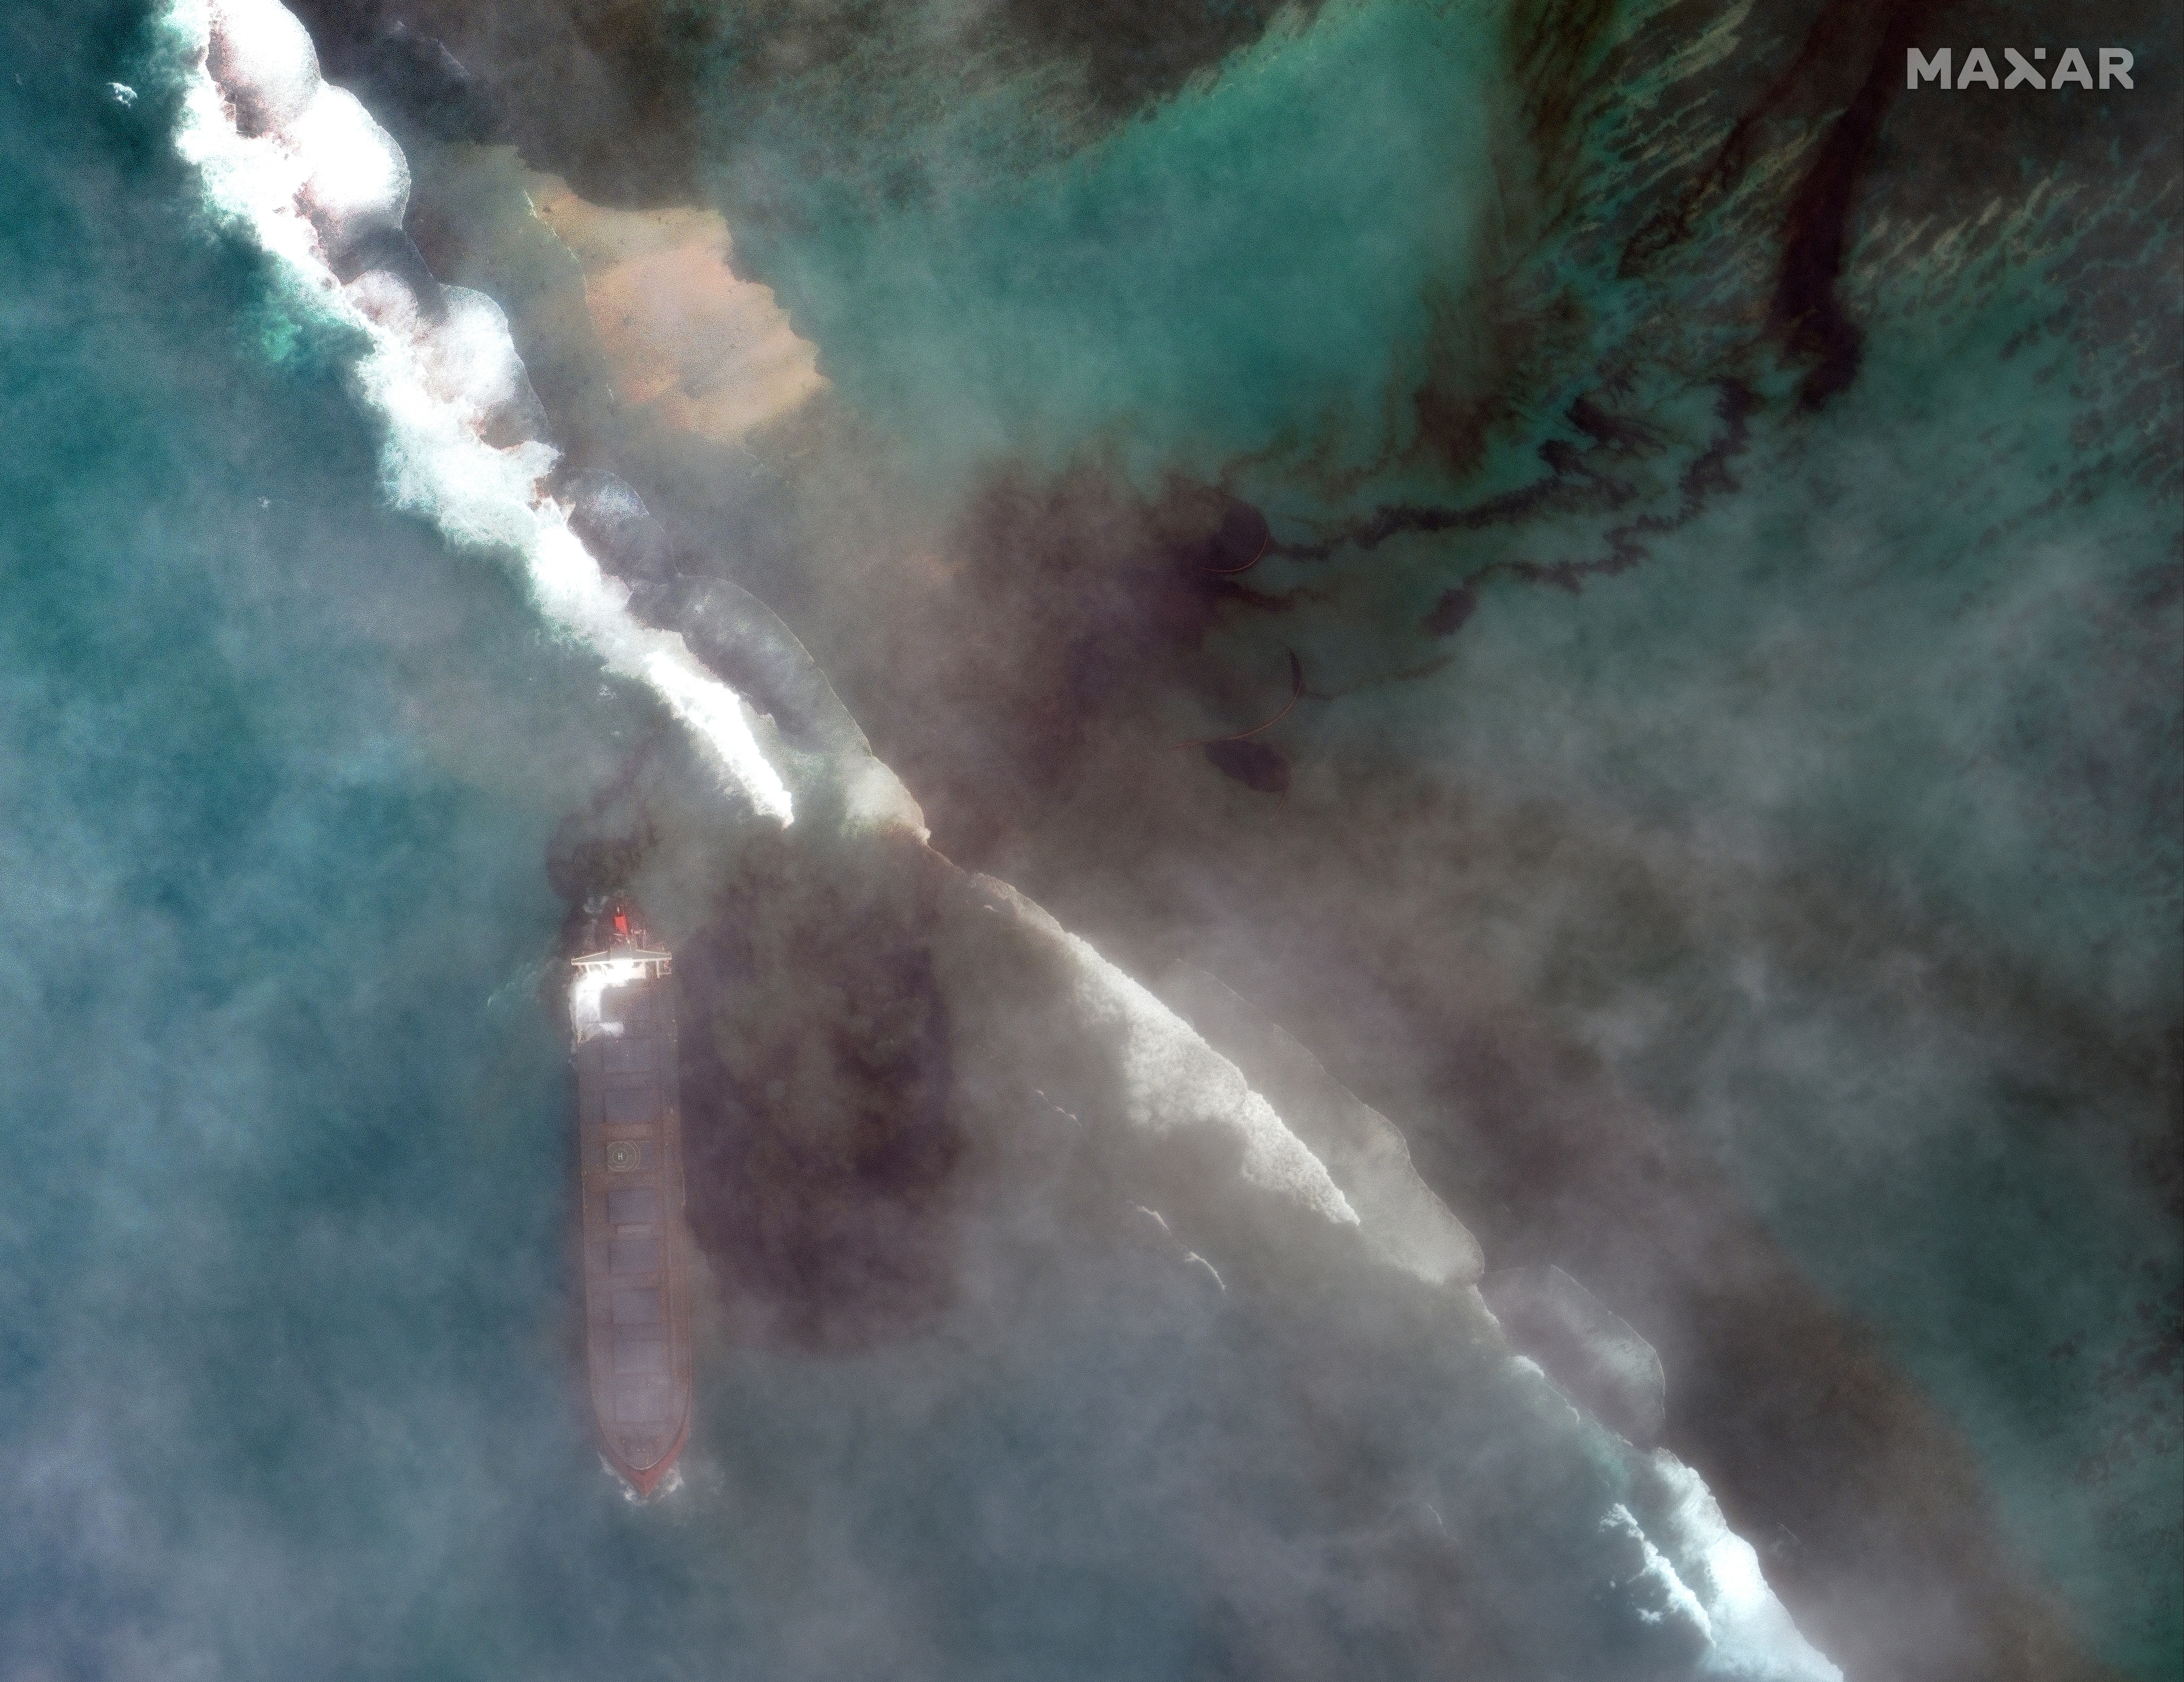 Satellite image shows the MV Wakashio, a bulk carrier ship that recently ran aground off the southeast coast of Mauritius